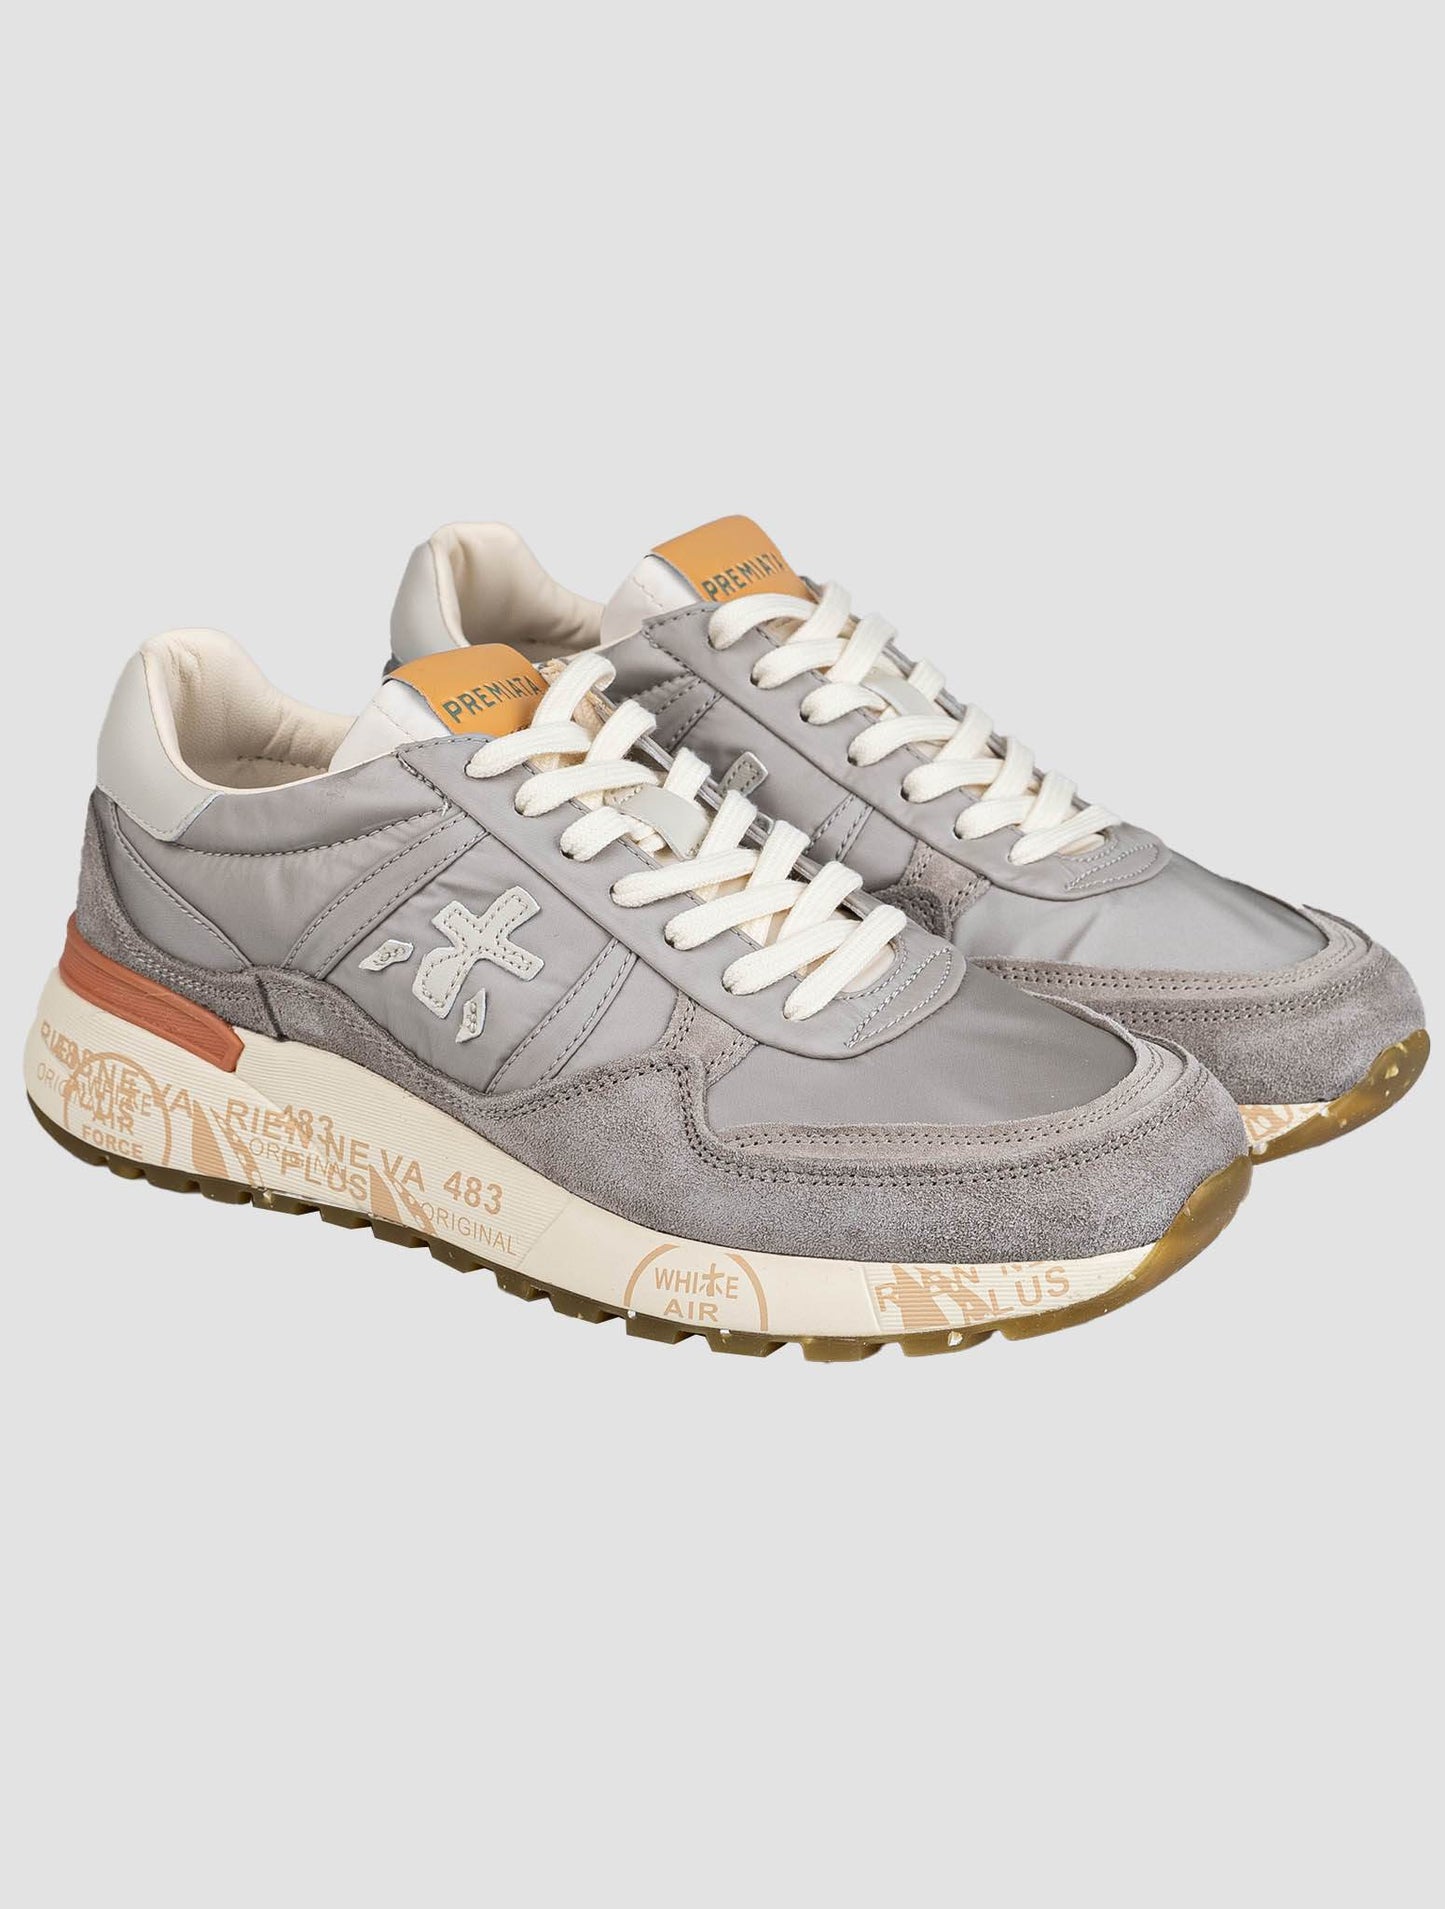 Premiata Taupe Leather Suede Pa Pu Sneakers